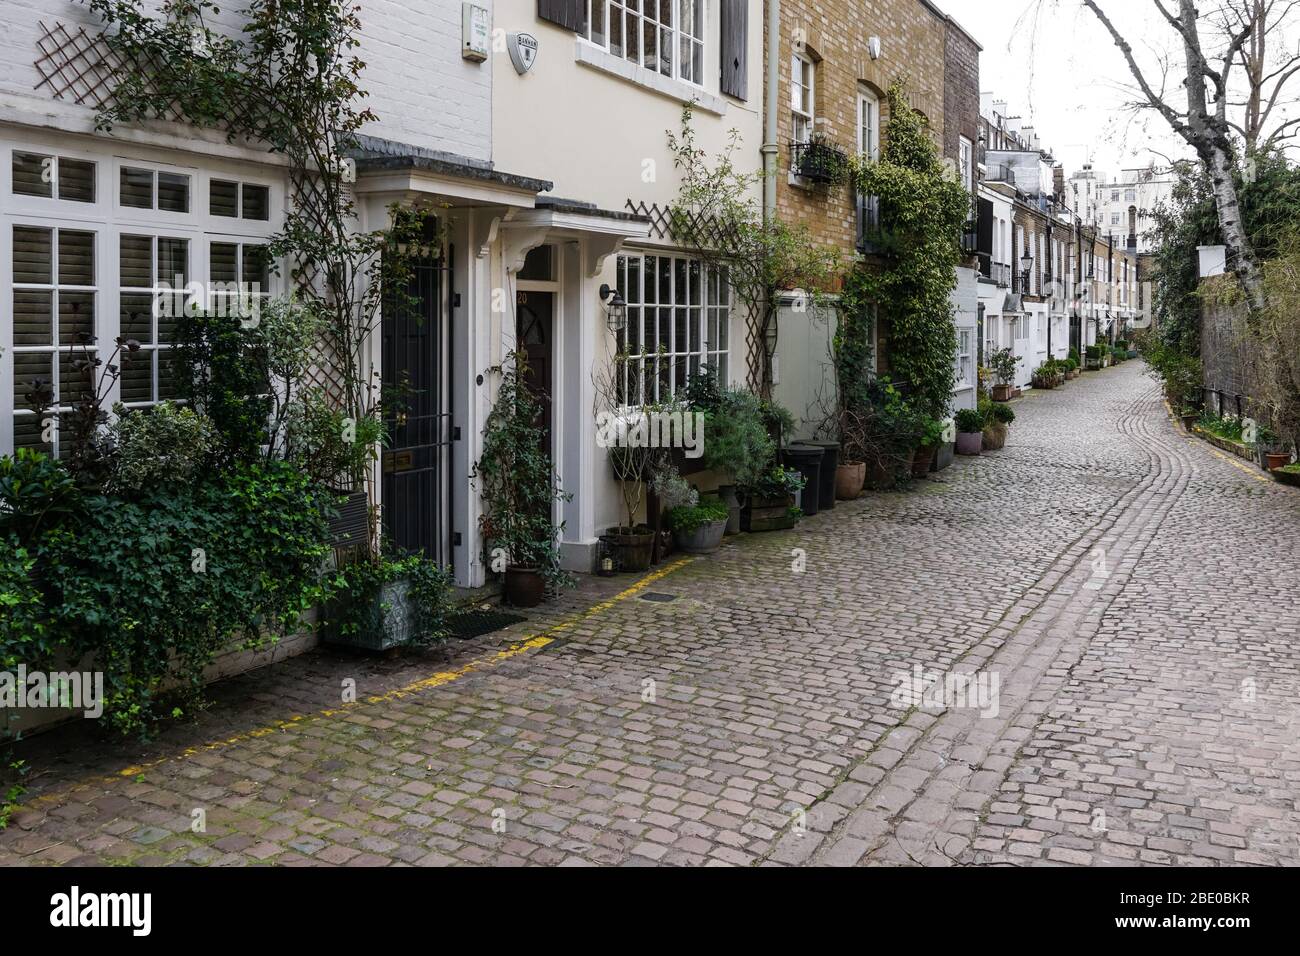 Residential properties on cobbled Kynance Mews in South Kensington, London England United Kingdom UK Stock Photo